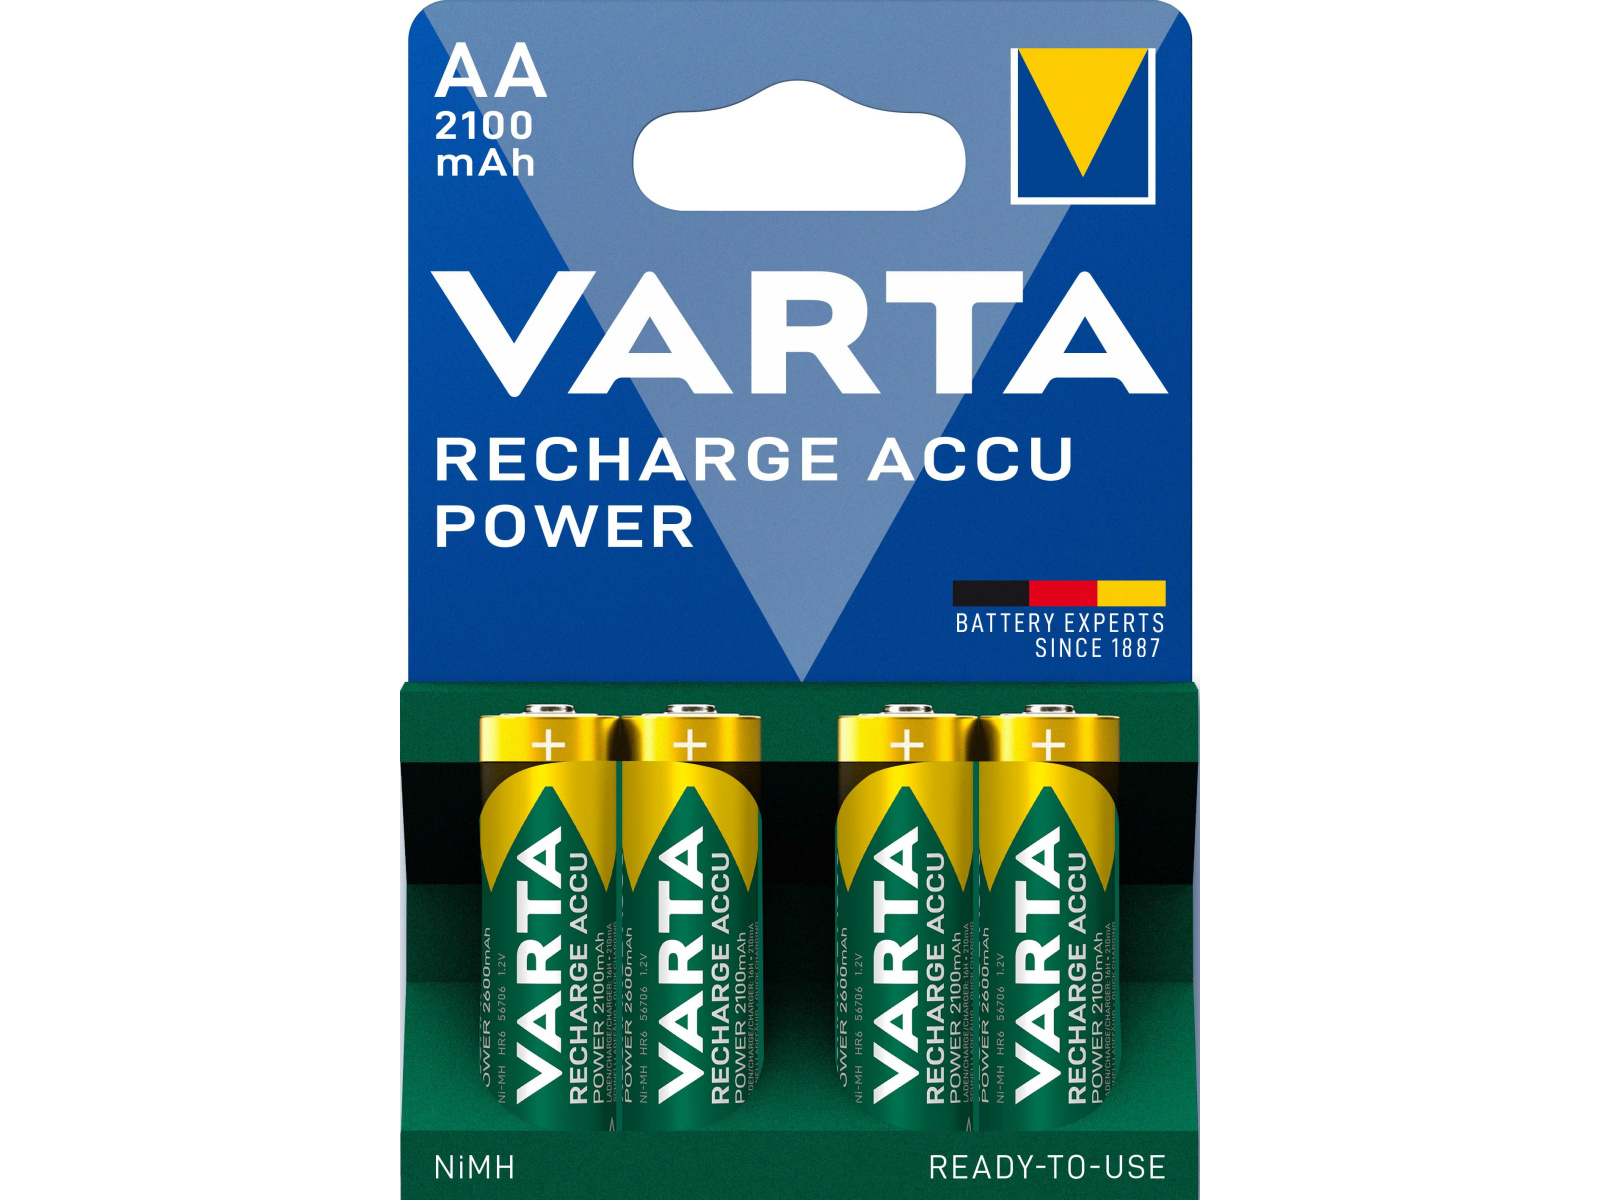 4x Rechargeable Accu AA Pre-Charged NiMH 2100 mAh Mignon Varta 56706  image